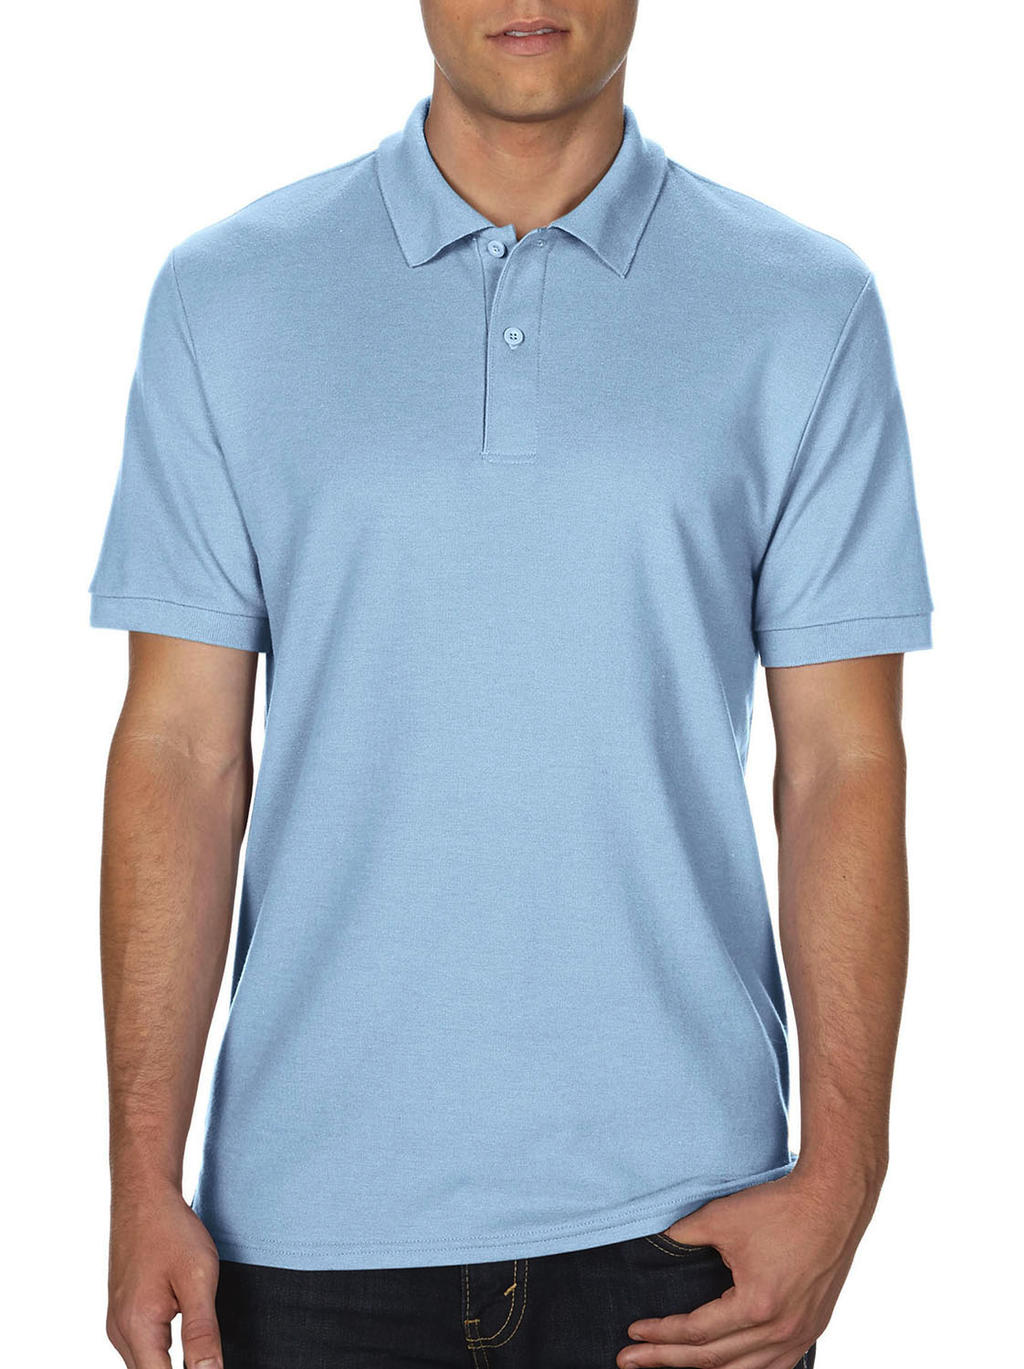  DryBlend? Double Piqu? Polo in Farbe Light Blue